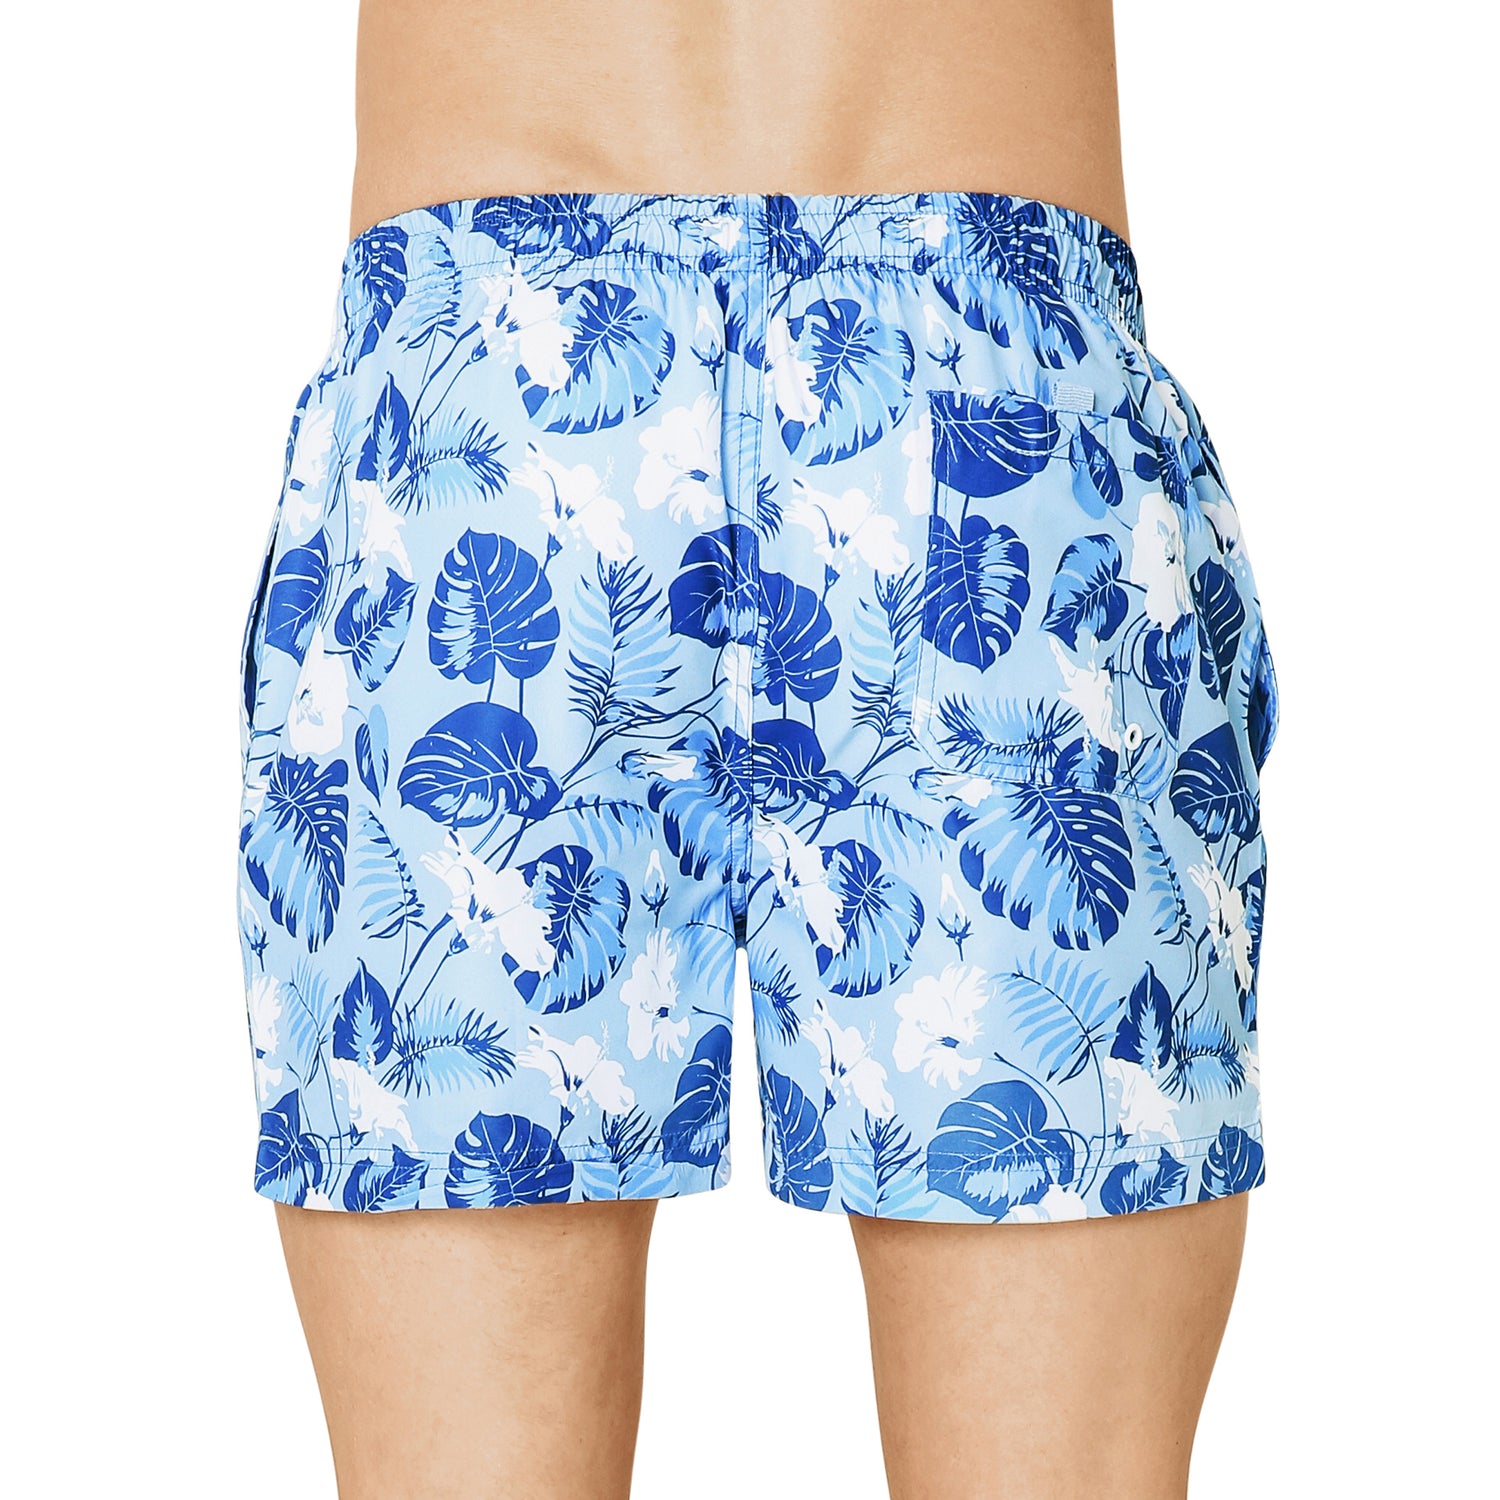 Printed swim shorts with mesh lining, TURQUOISE color. With travel pouch!